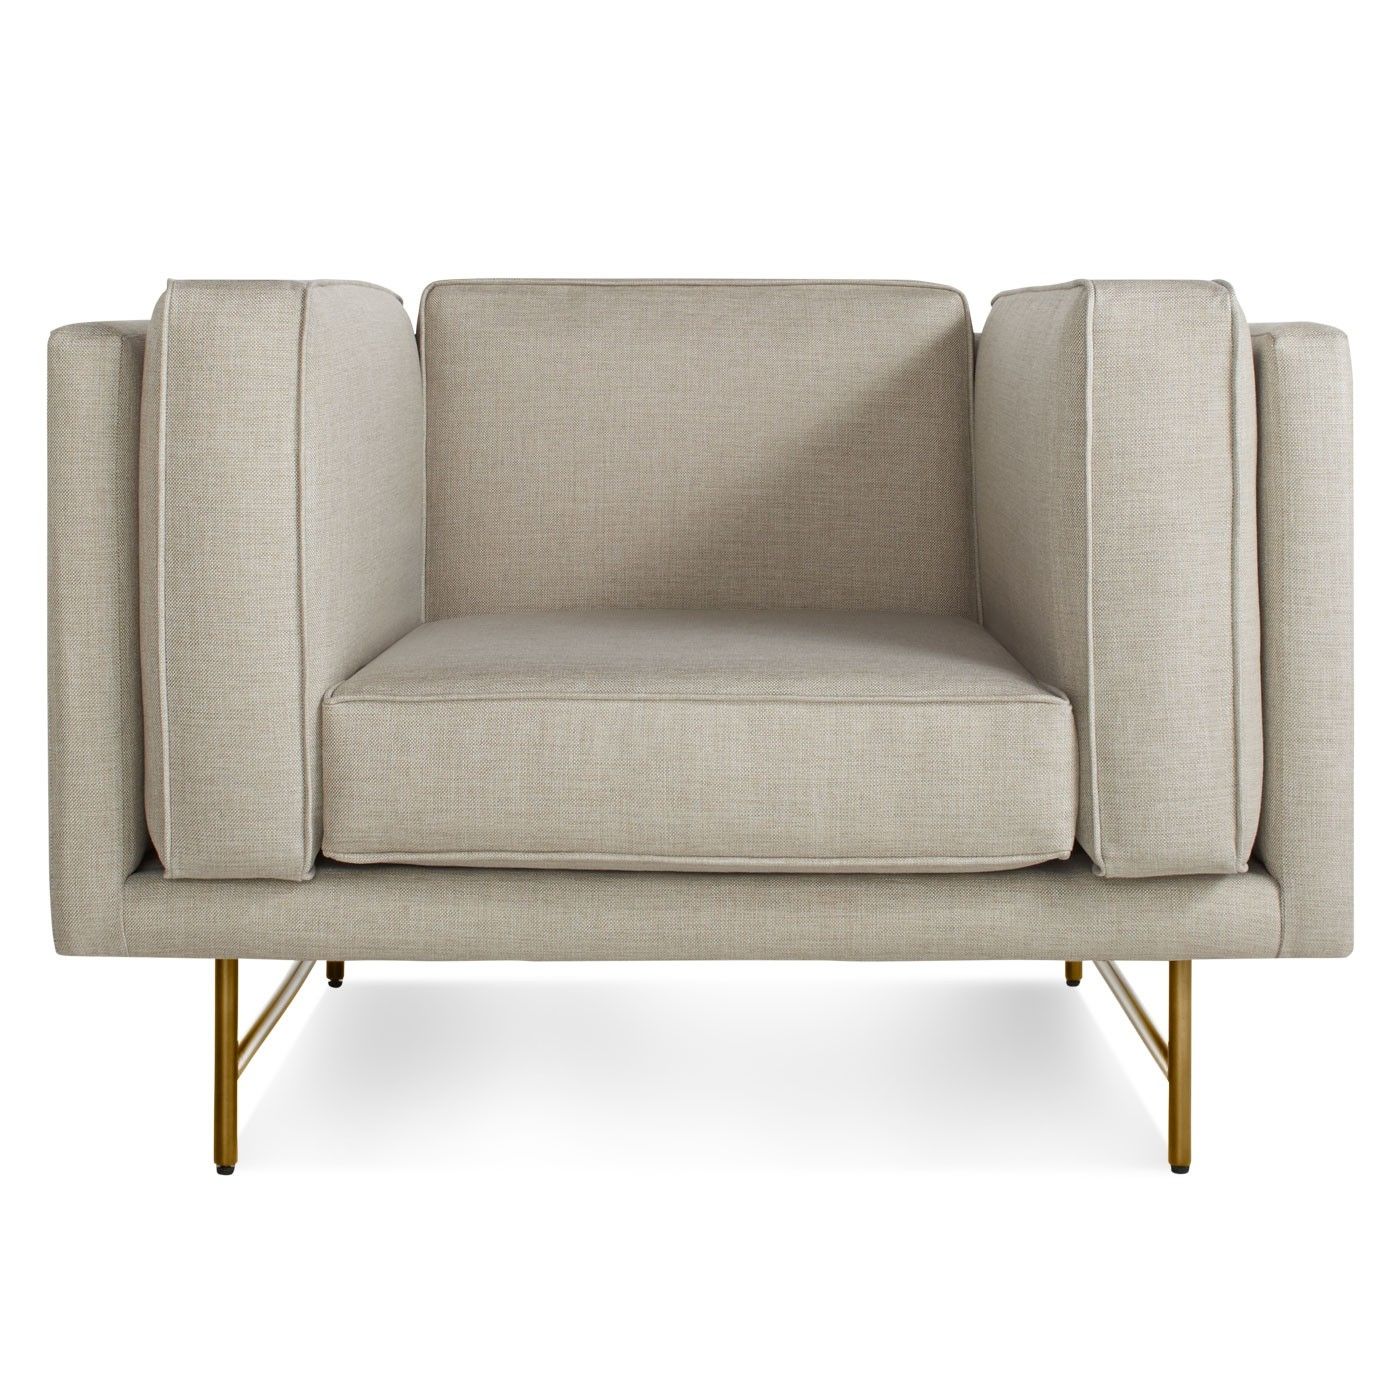 Bank Upholstered Club Chair Modern Club Chair Blu Dot Pertaining To Lounge Sofas And Chairs (View 15 of 15)